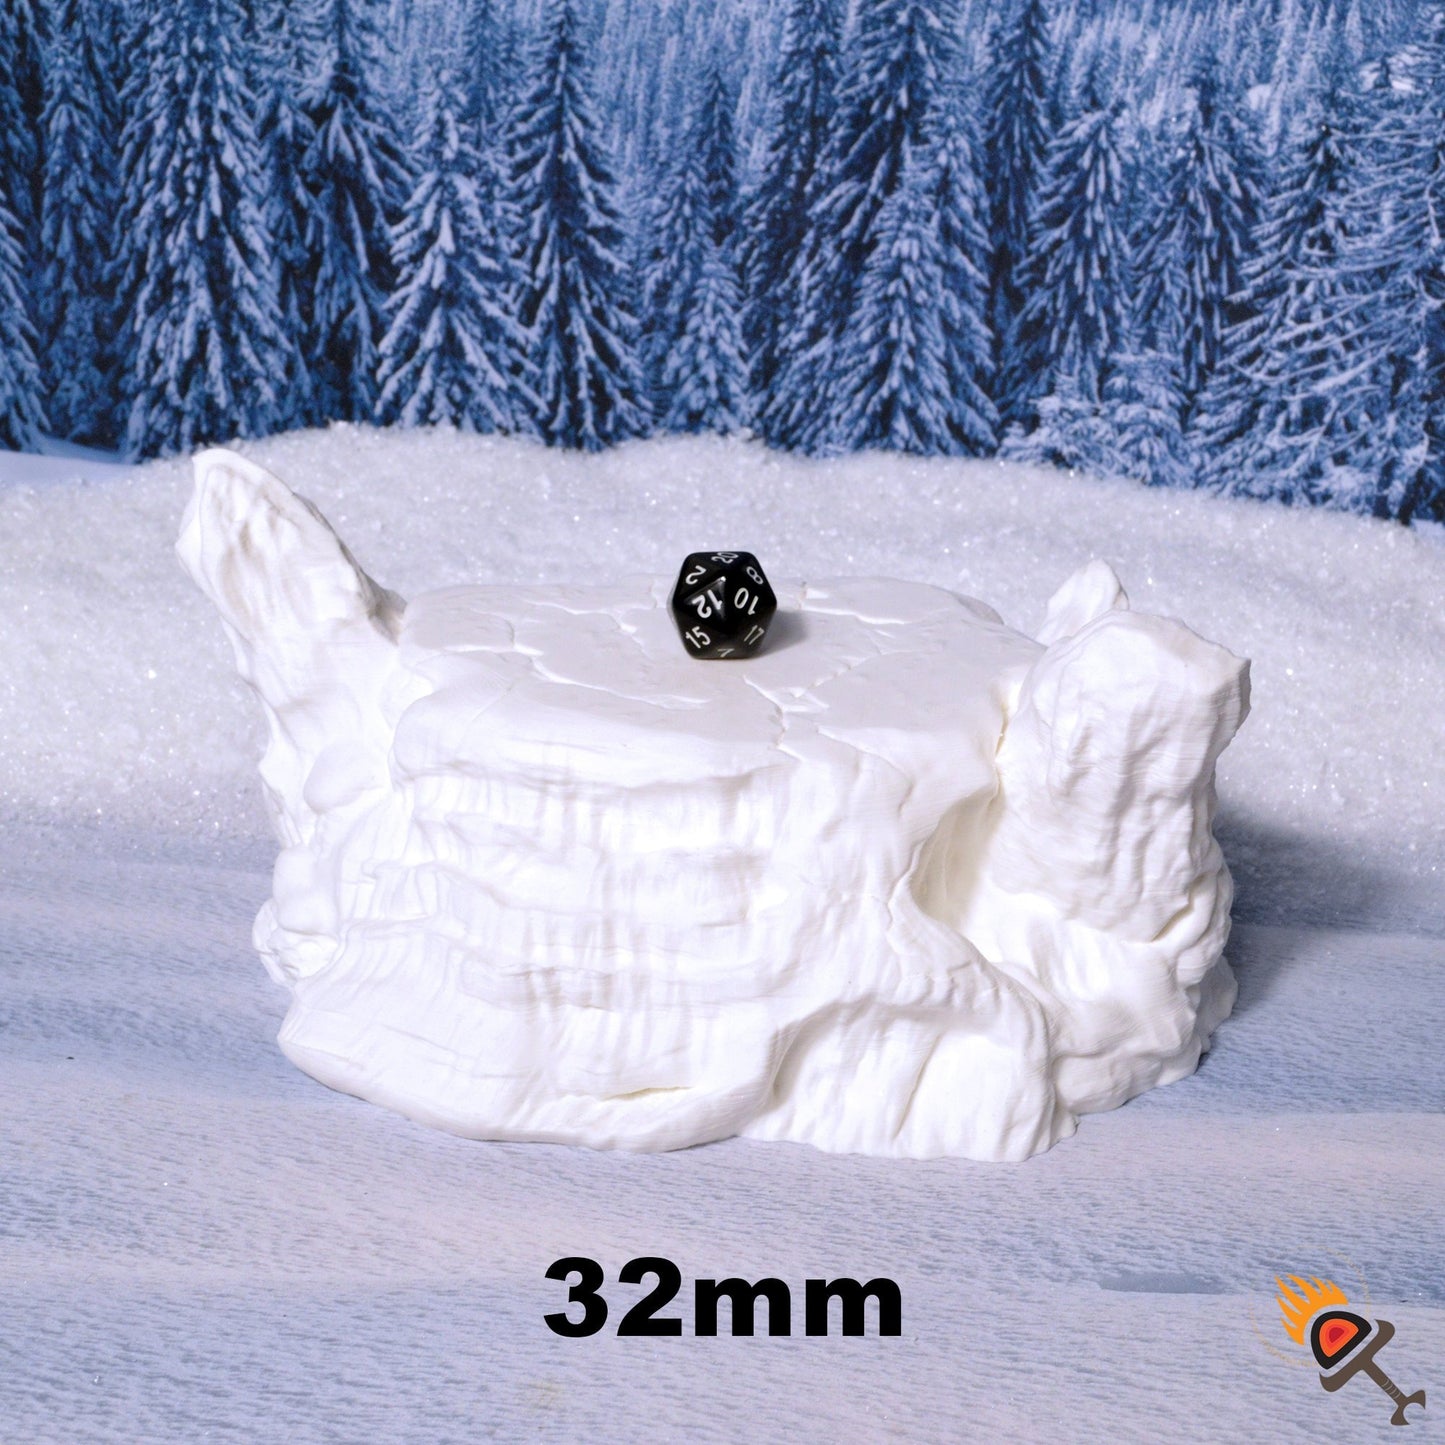 Snow and Ice Hill 15mm 28mm 32mm for D&D Icewind Dale Terrain, Frostgrave DnD Pathfinder Arctic Snowy Icy Terrain